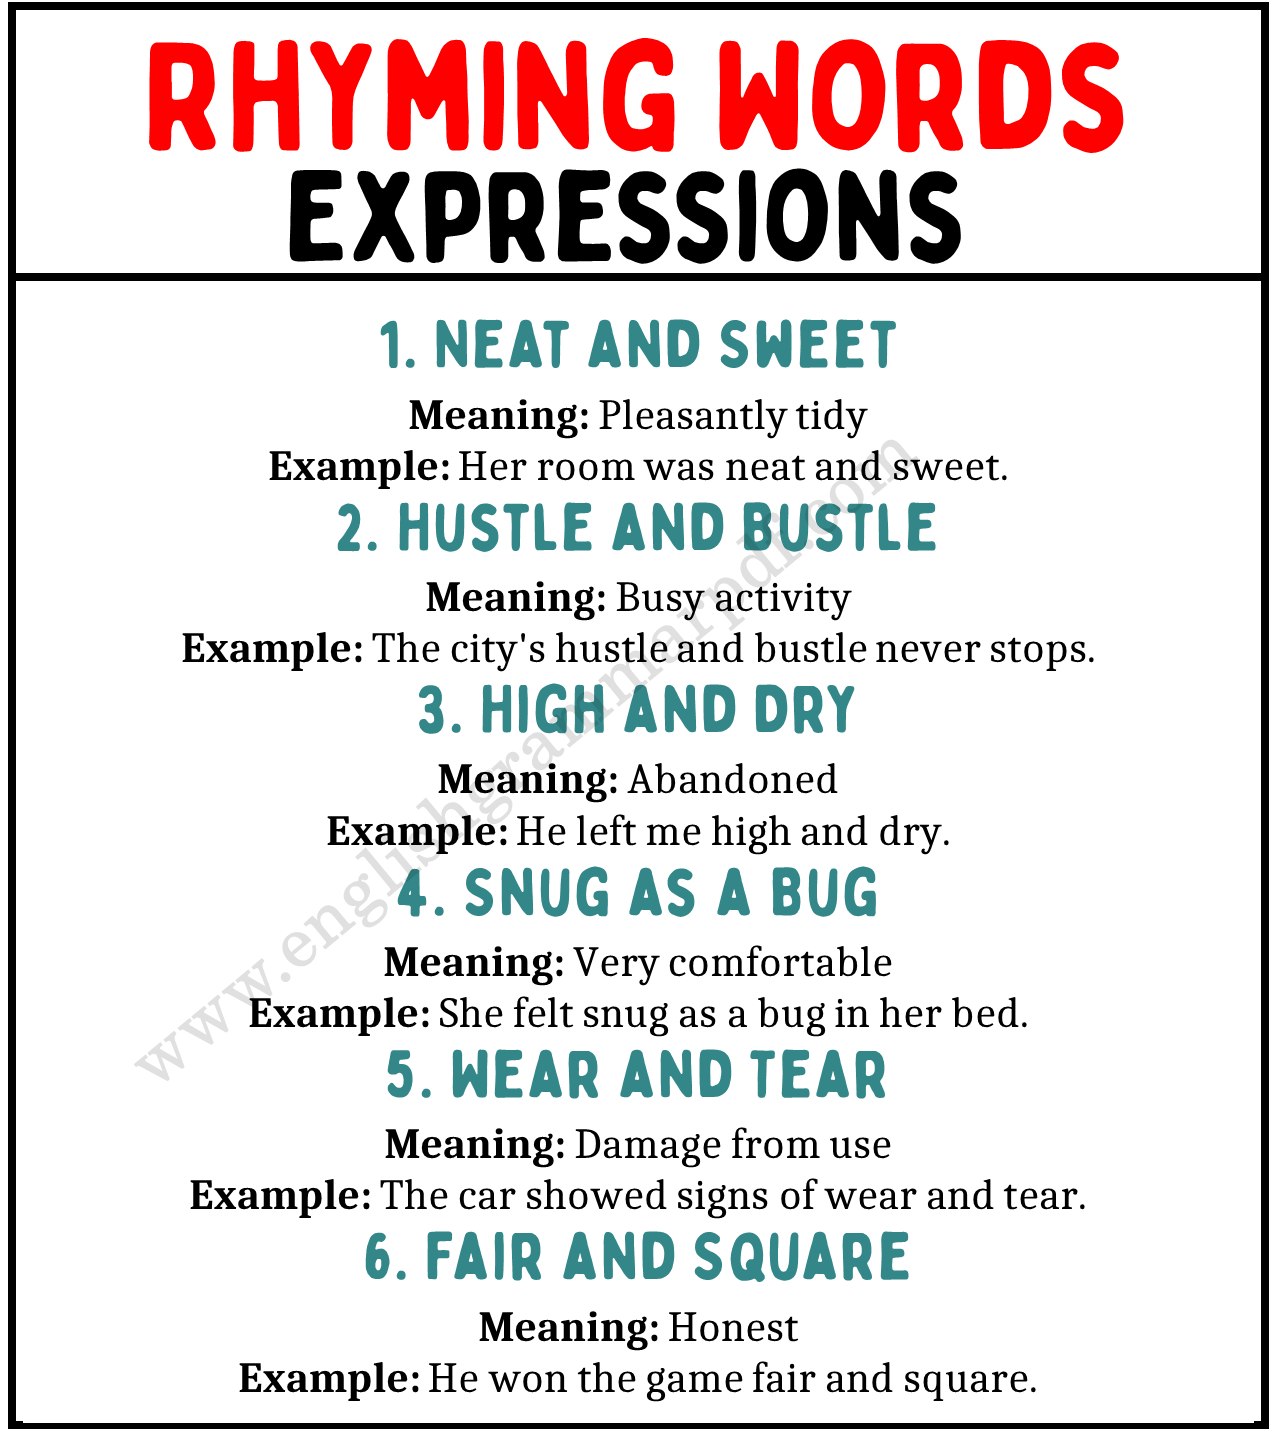 Rhyming Words Expressions